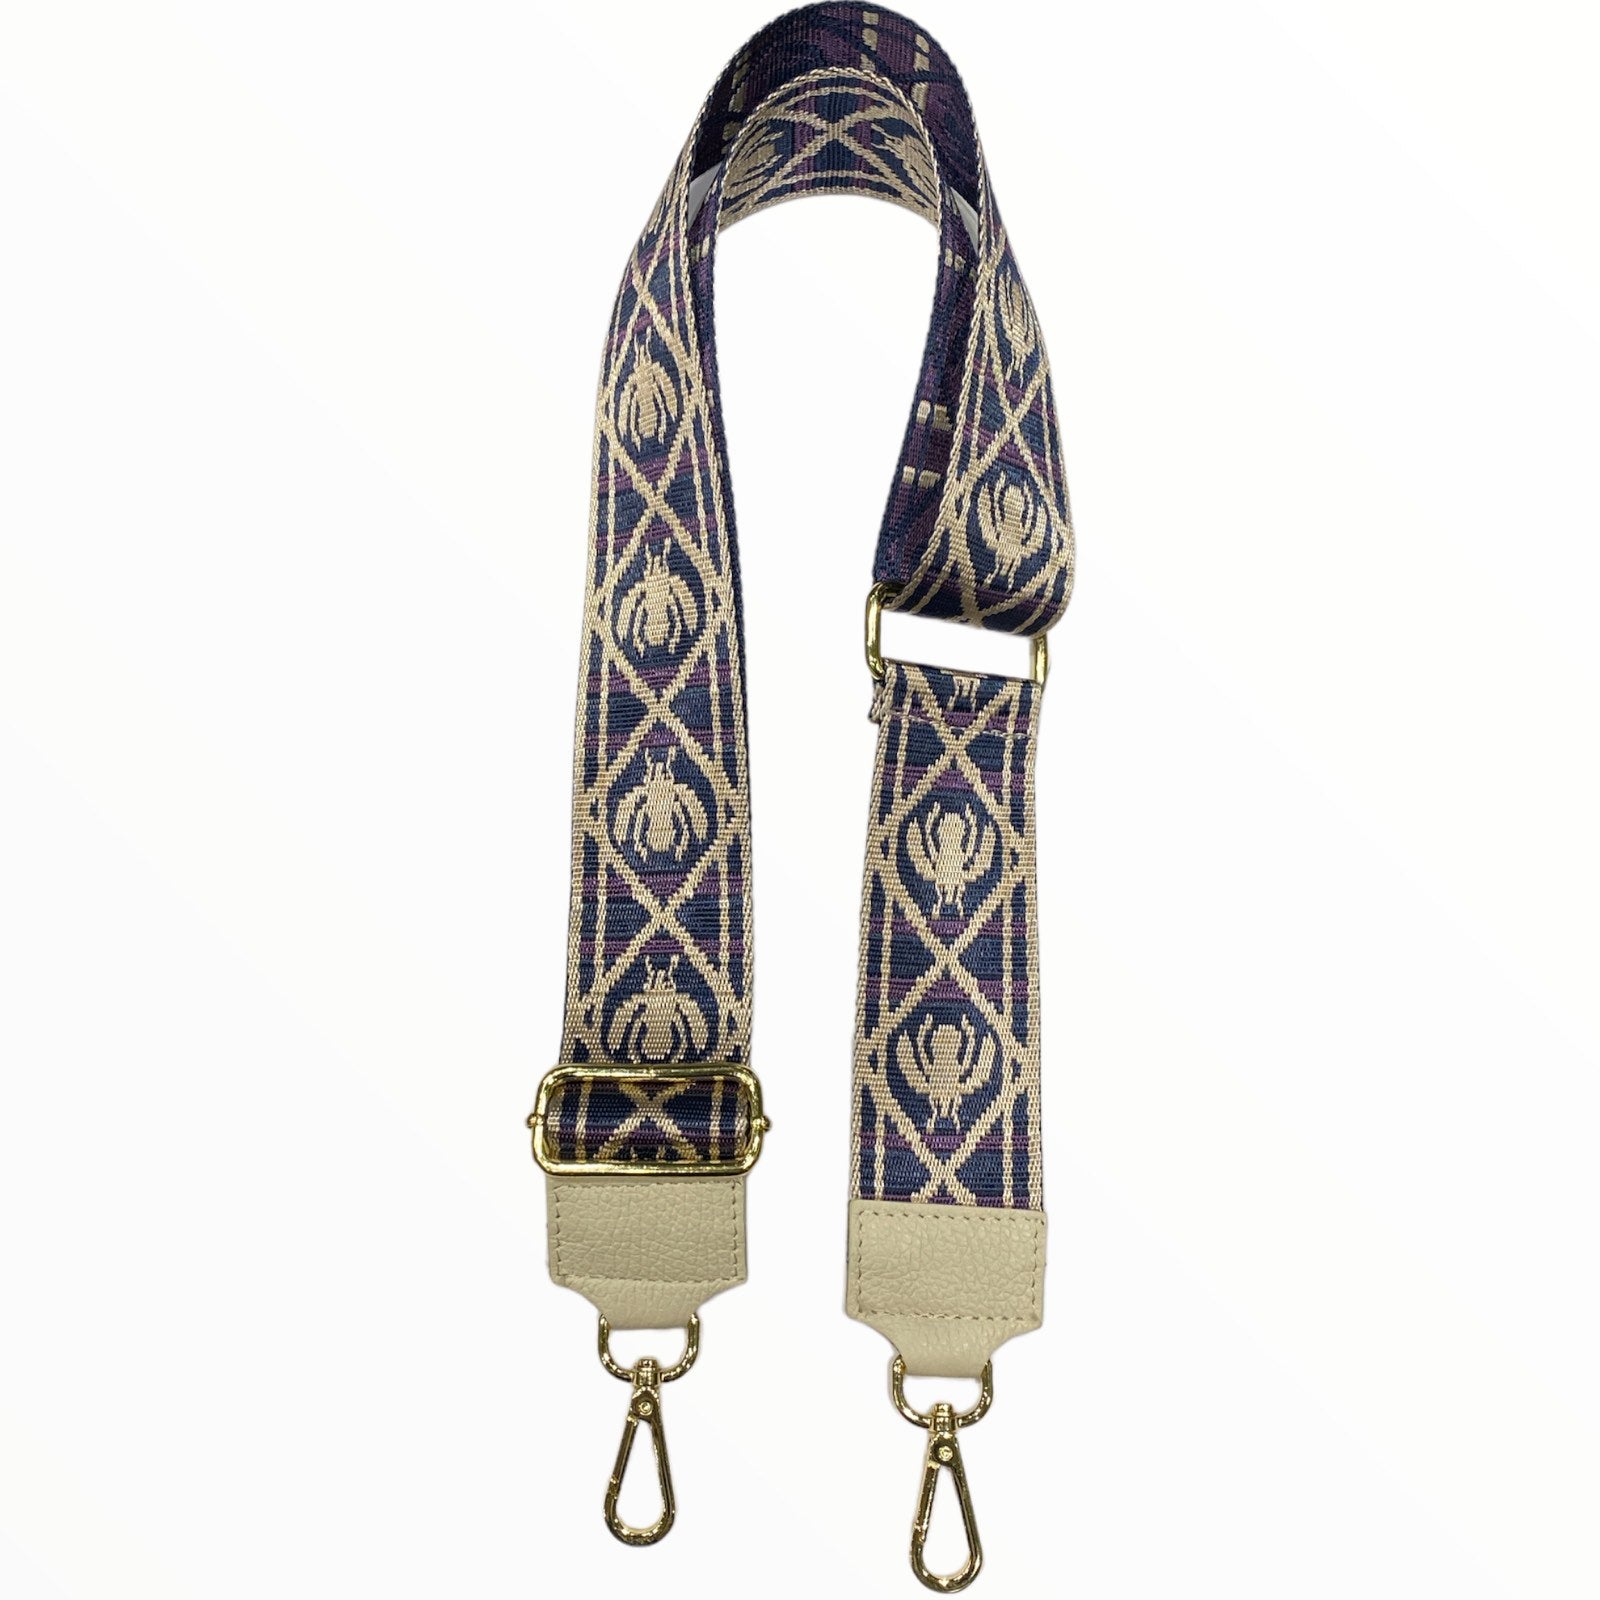 Purple bees adjustable strap with beige leather details